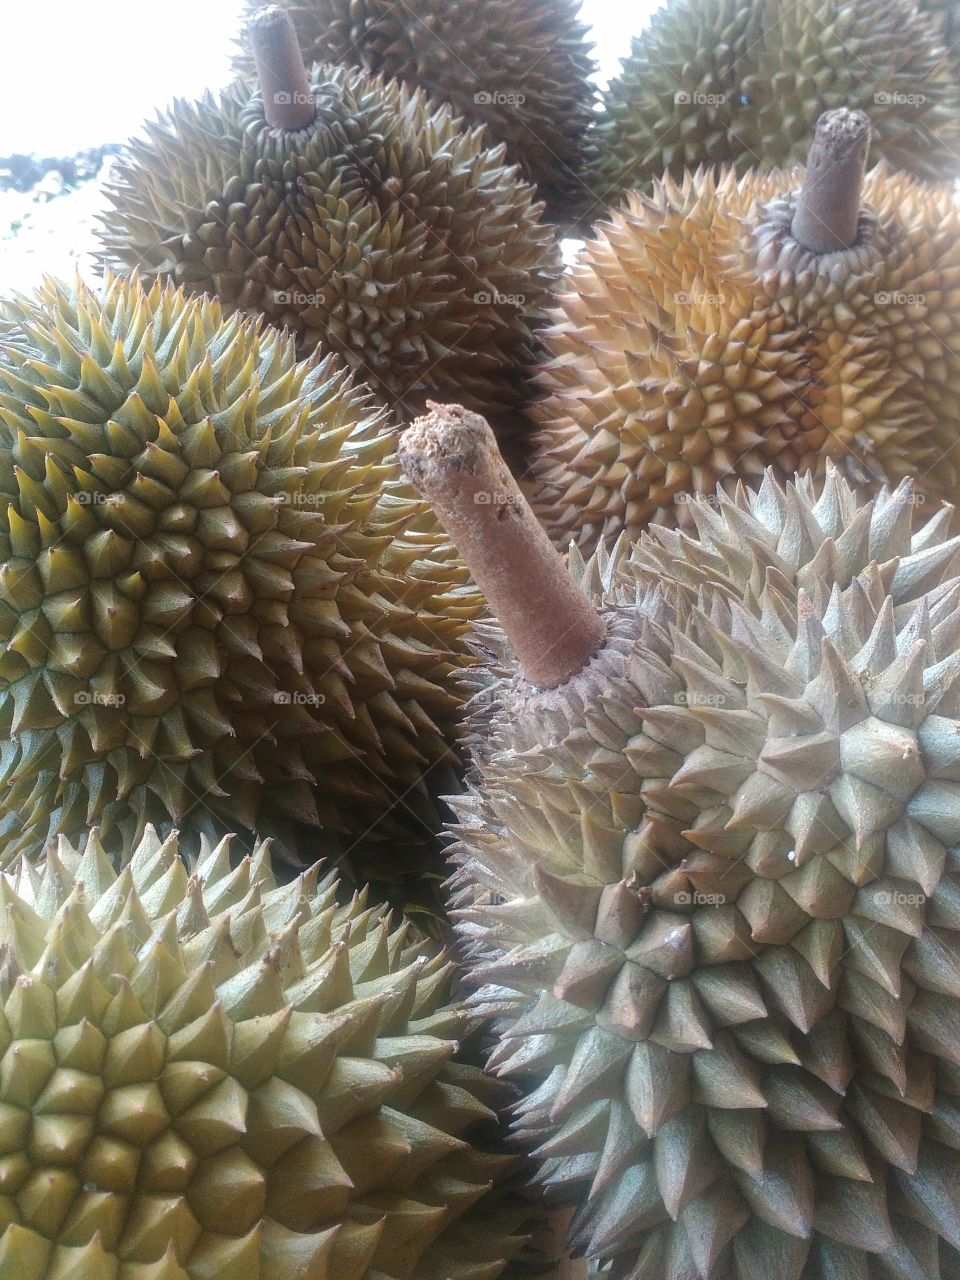 durian is one of the a delicious fruits.in Indonesia found many variety of this fruits.